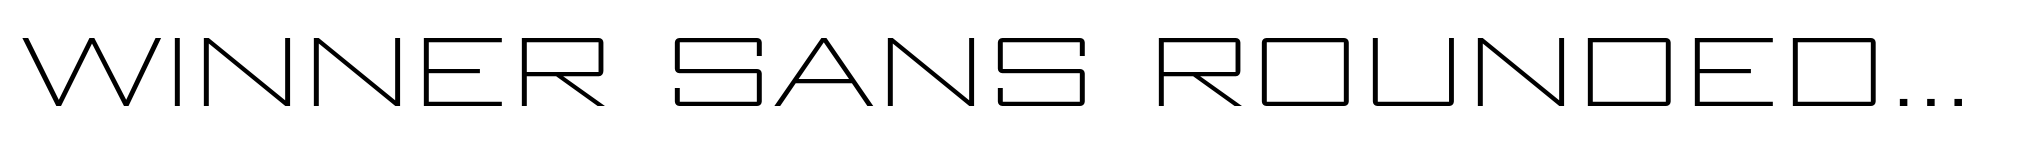 Winner Sans Rounded Extended Thin image